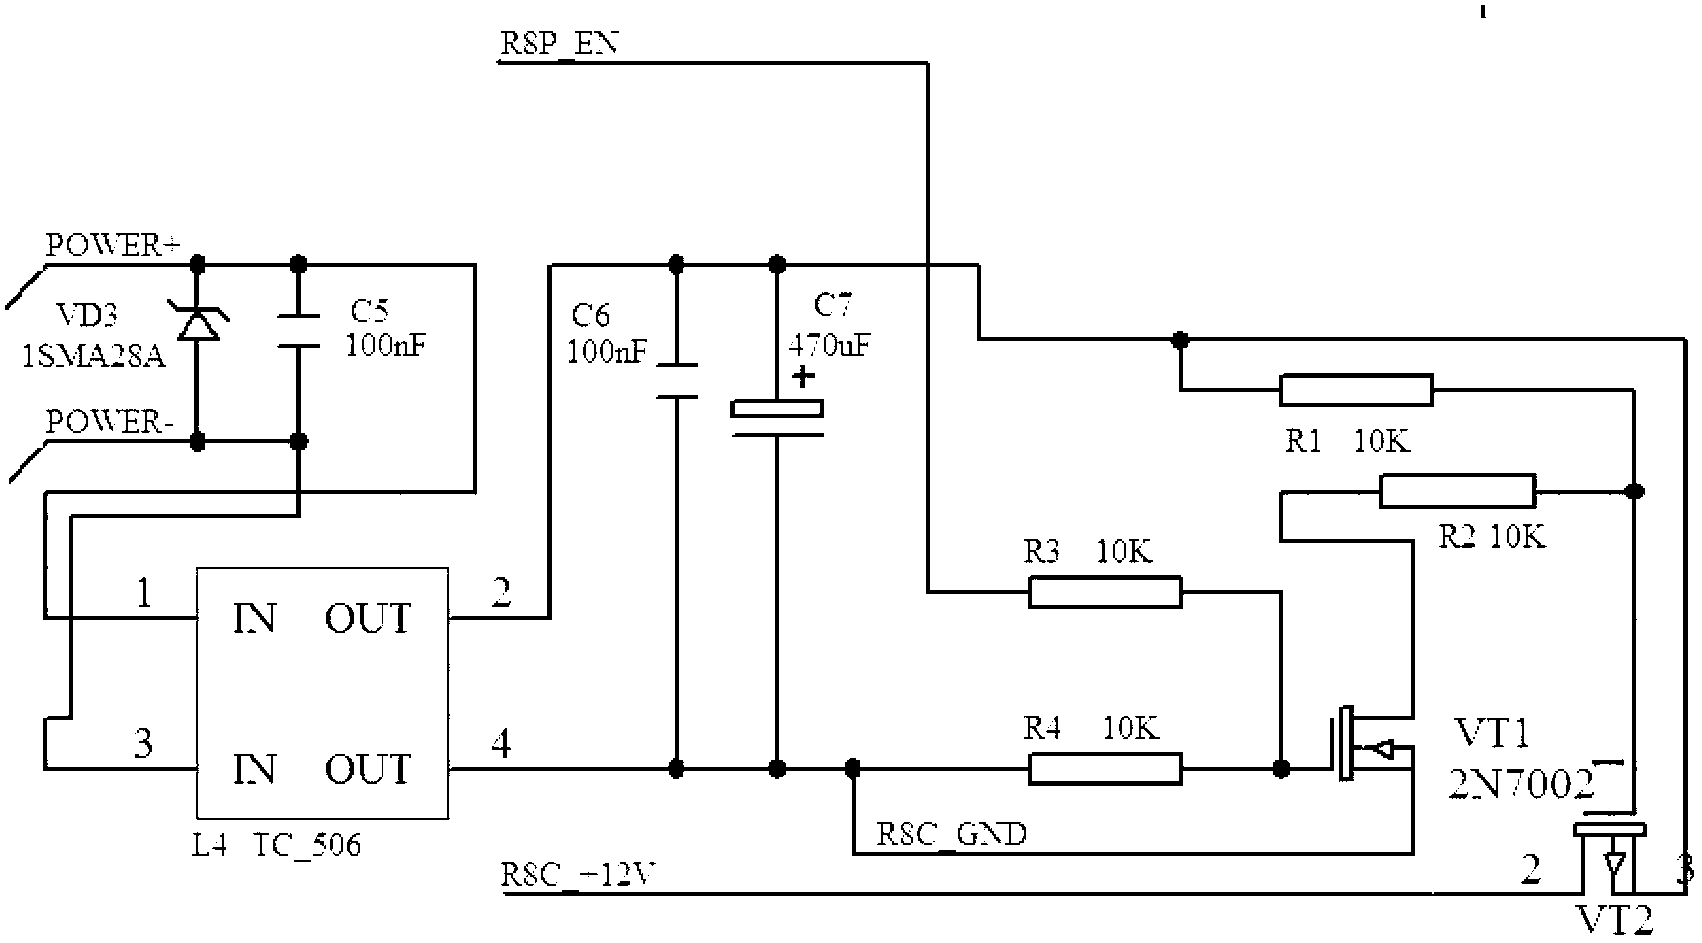 Battery management and acquisition subsystem of new energy vehicle and method for controlling battery management and acquisition subsystem